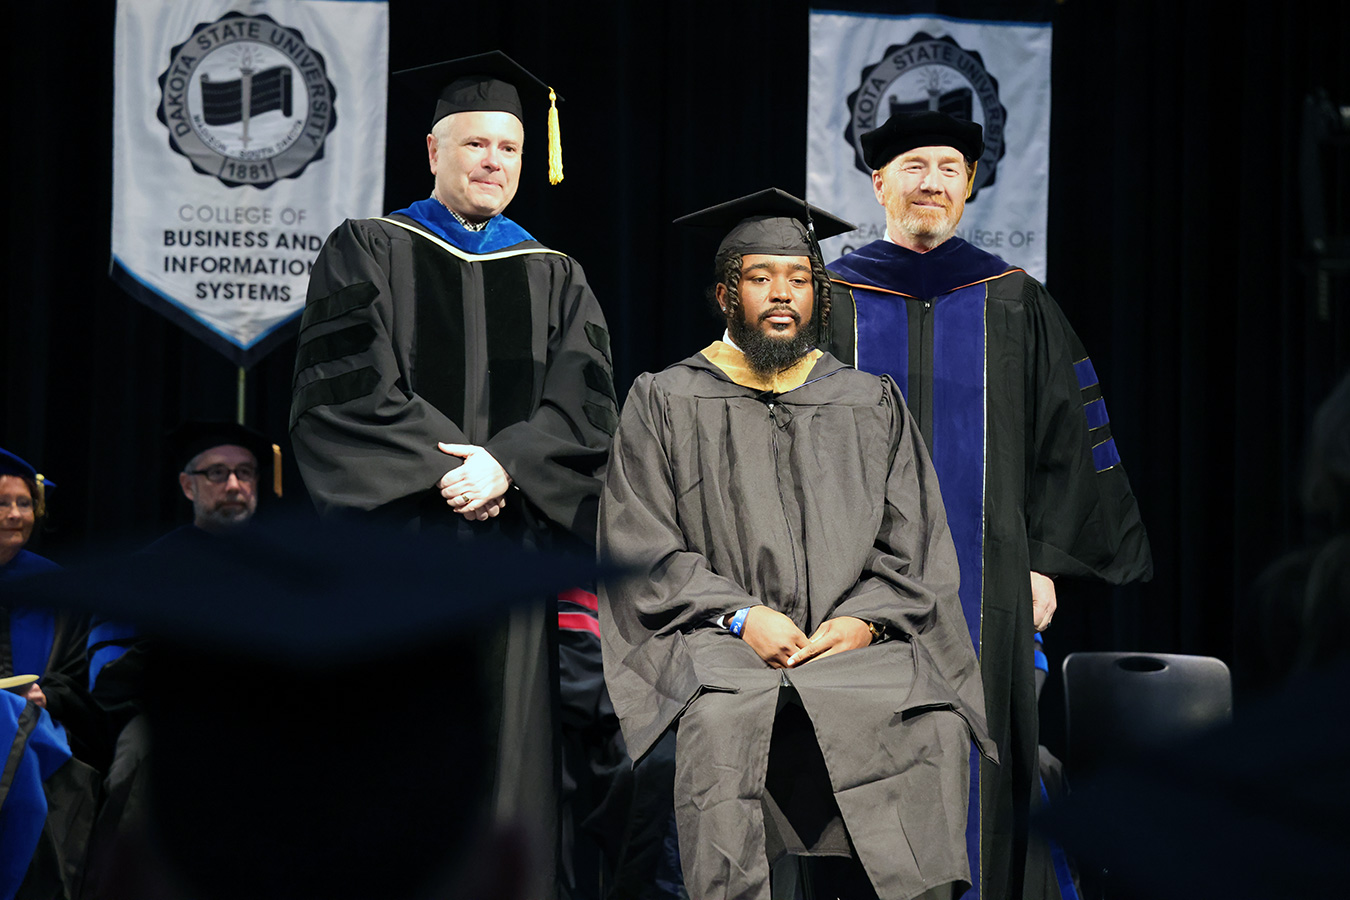 Daidrick Kibbie (center) with Dan Talley (right) and Mark Hawkes (left) at the hooding ceremony after earning his MBA.